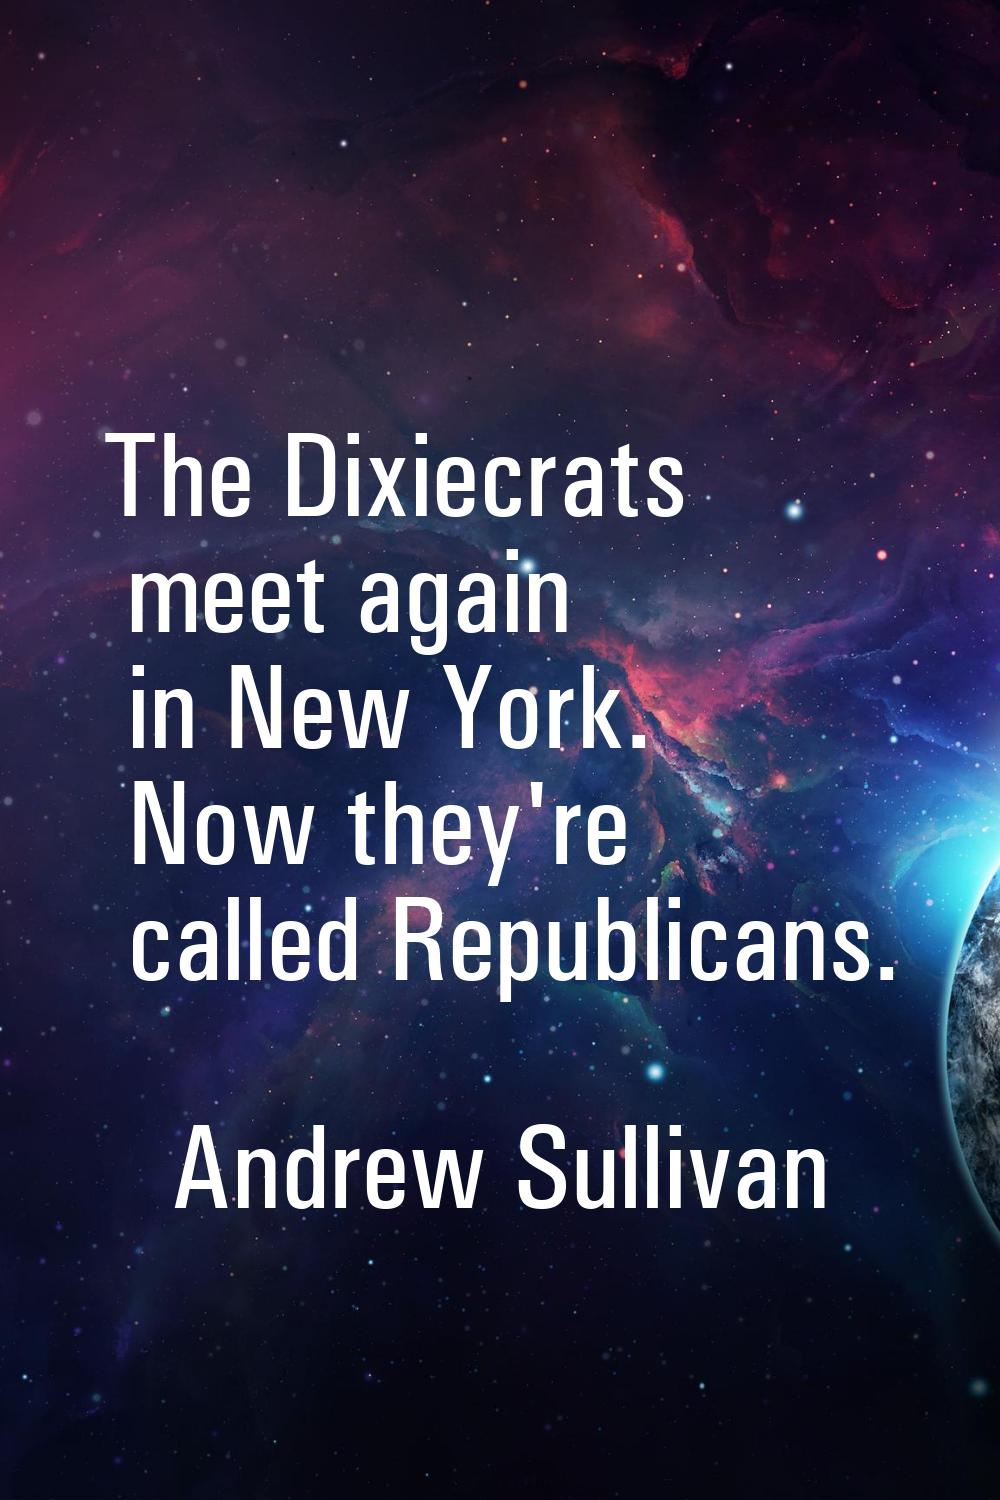 The Dixiecrats meet again in New York. Now they're called Republicans.